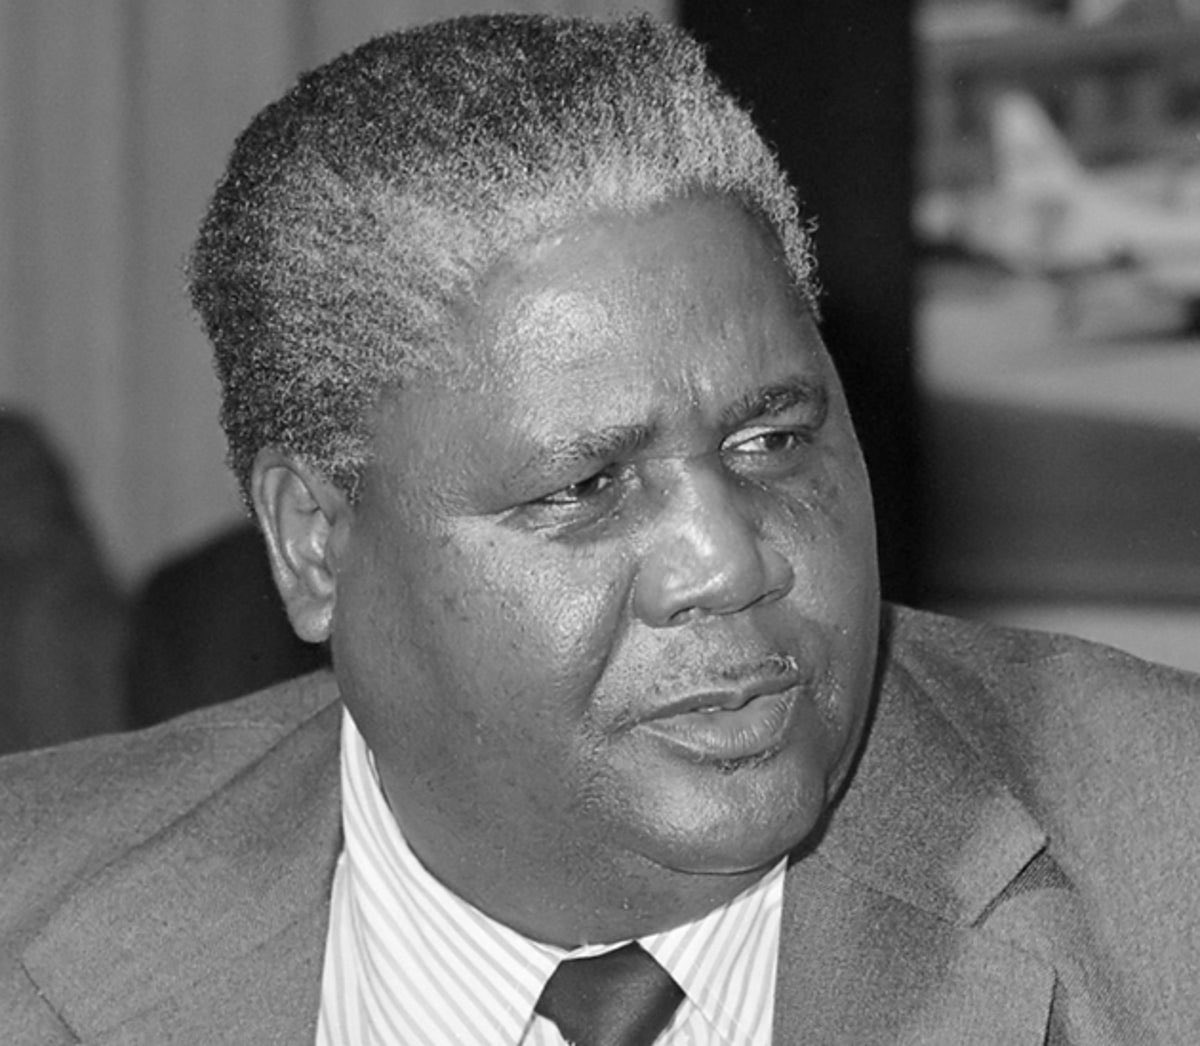 Tongogara was a brilliant political and military mind, more of a visionary as most circles would describe him. He was in support of fostering unity between Zanu-PF & Zapu, he even held “secret” meetings with Joshua Nkomo & this led to his untimely death.